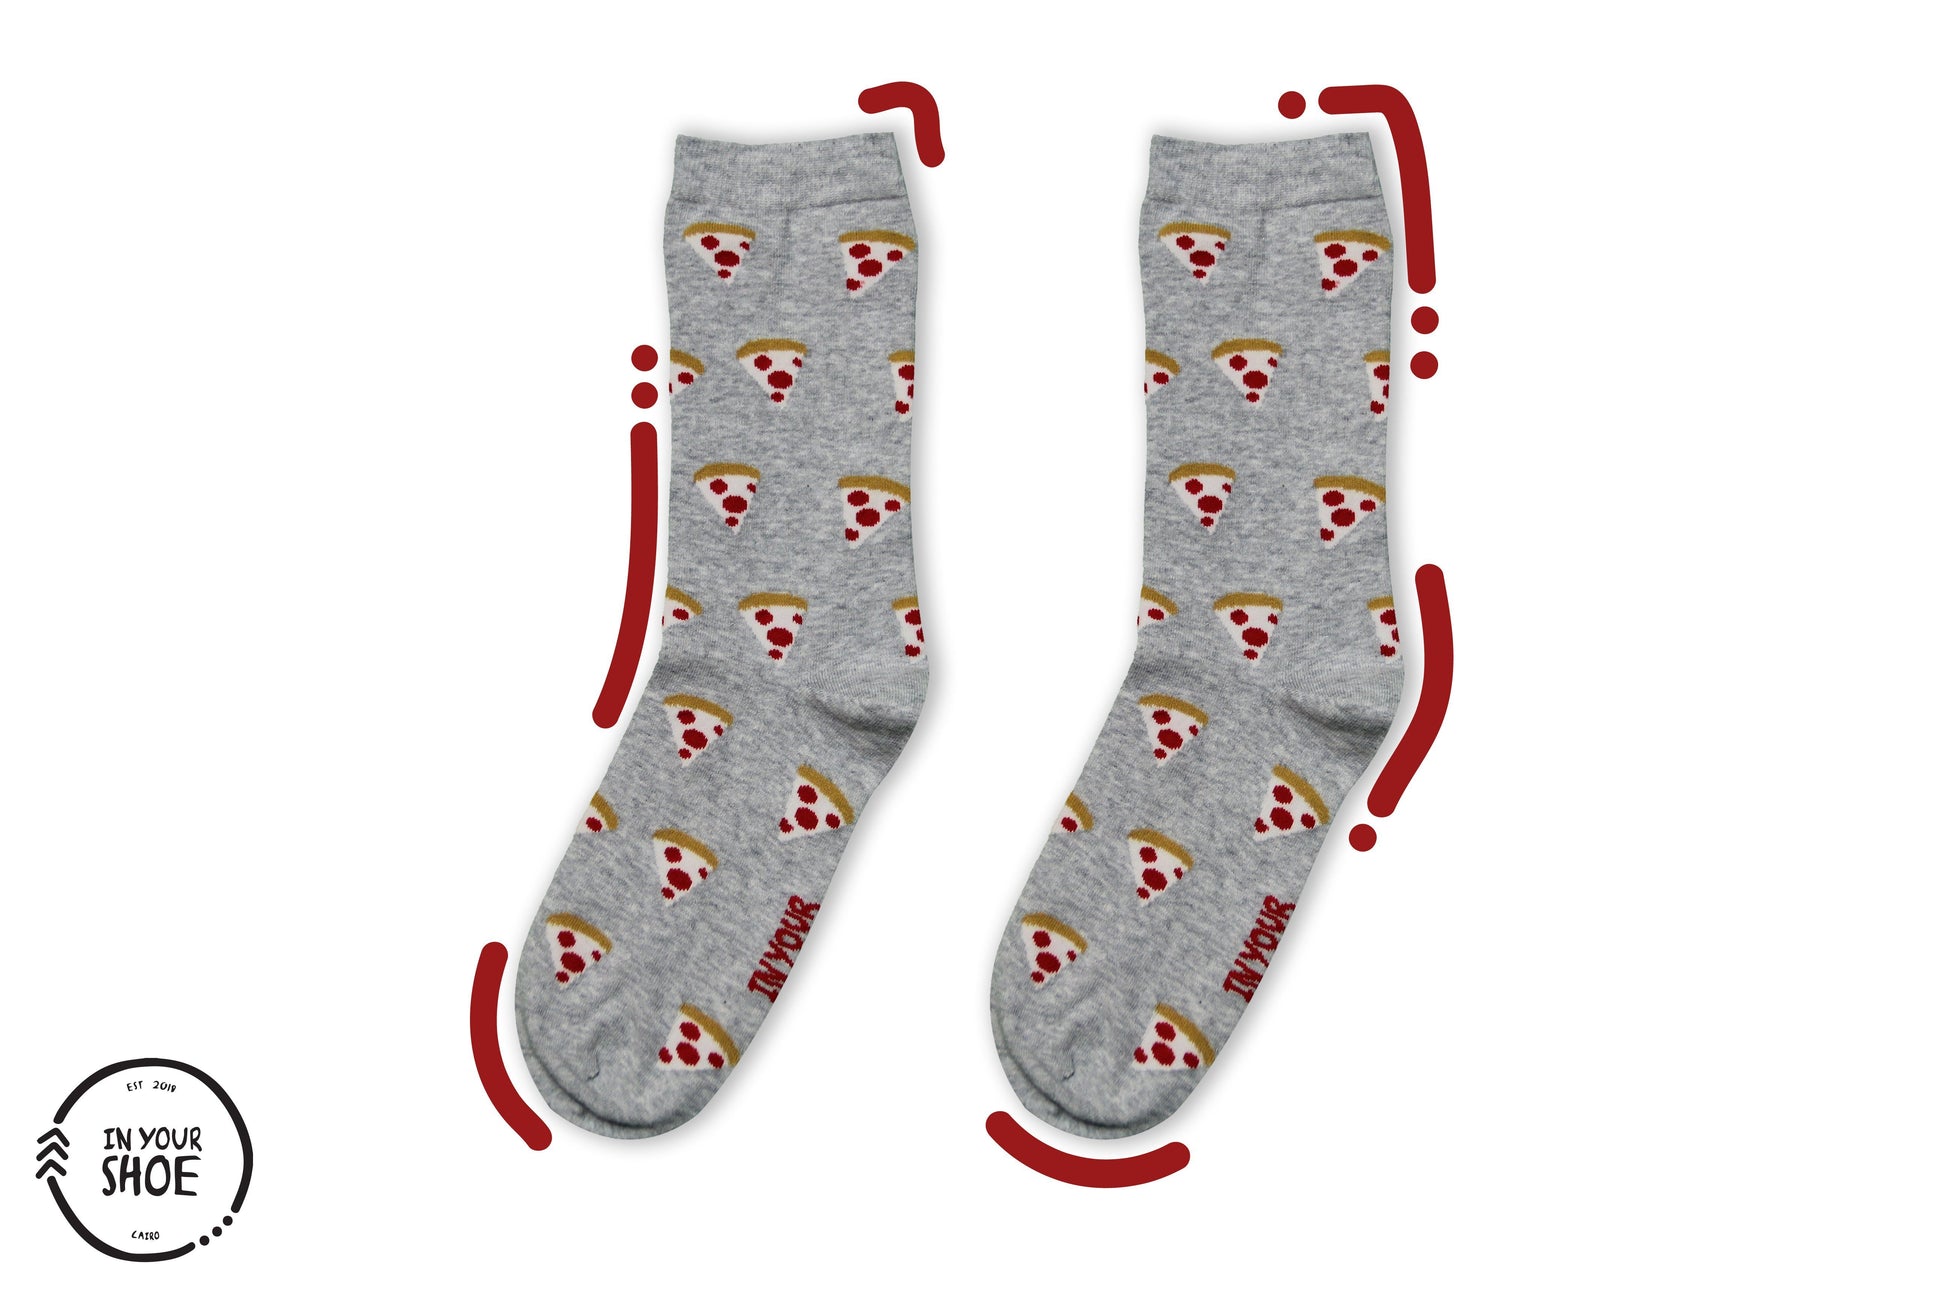 Pizza (Long Socks) NECK IN YOUR SHOE 